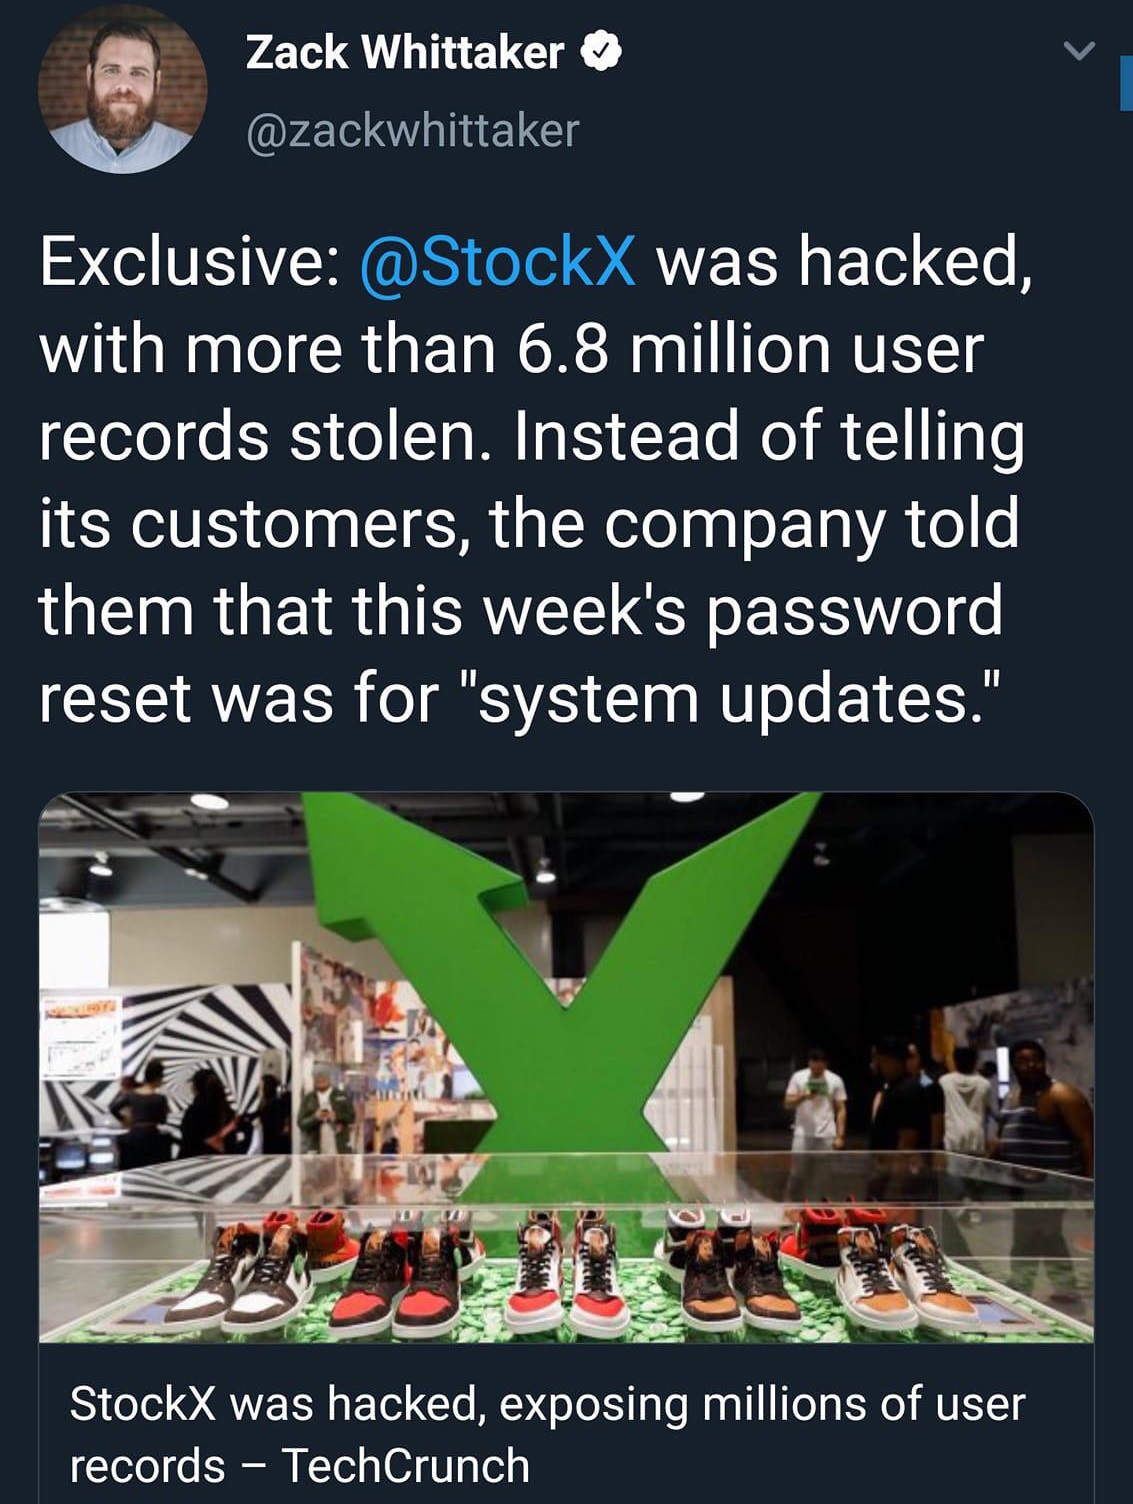 cats in the cradle lyrics - Zack Whittaker Exclusive was hacked, with more than 6.8 million user records stolen. Instead of telling its customers, the company told them that this week's password reset was for "system updates." StockX was hacked, exposing 